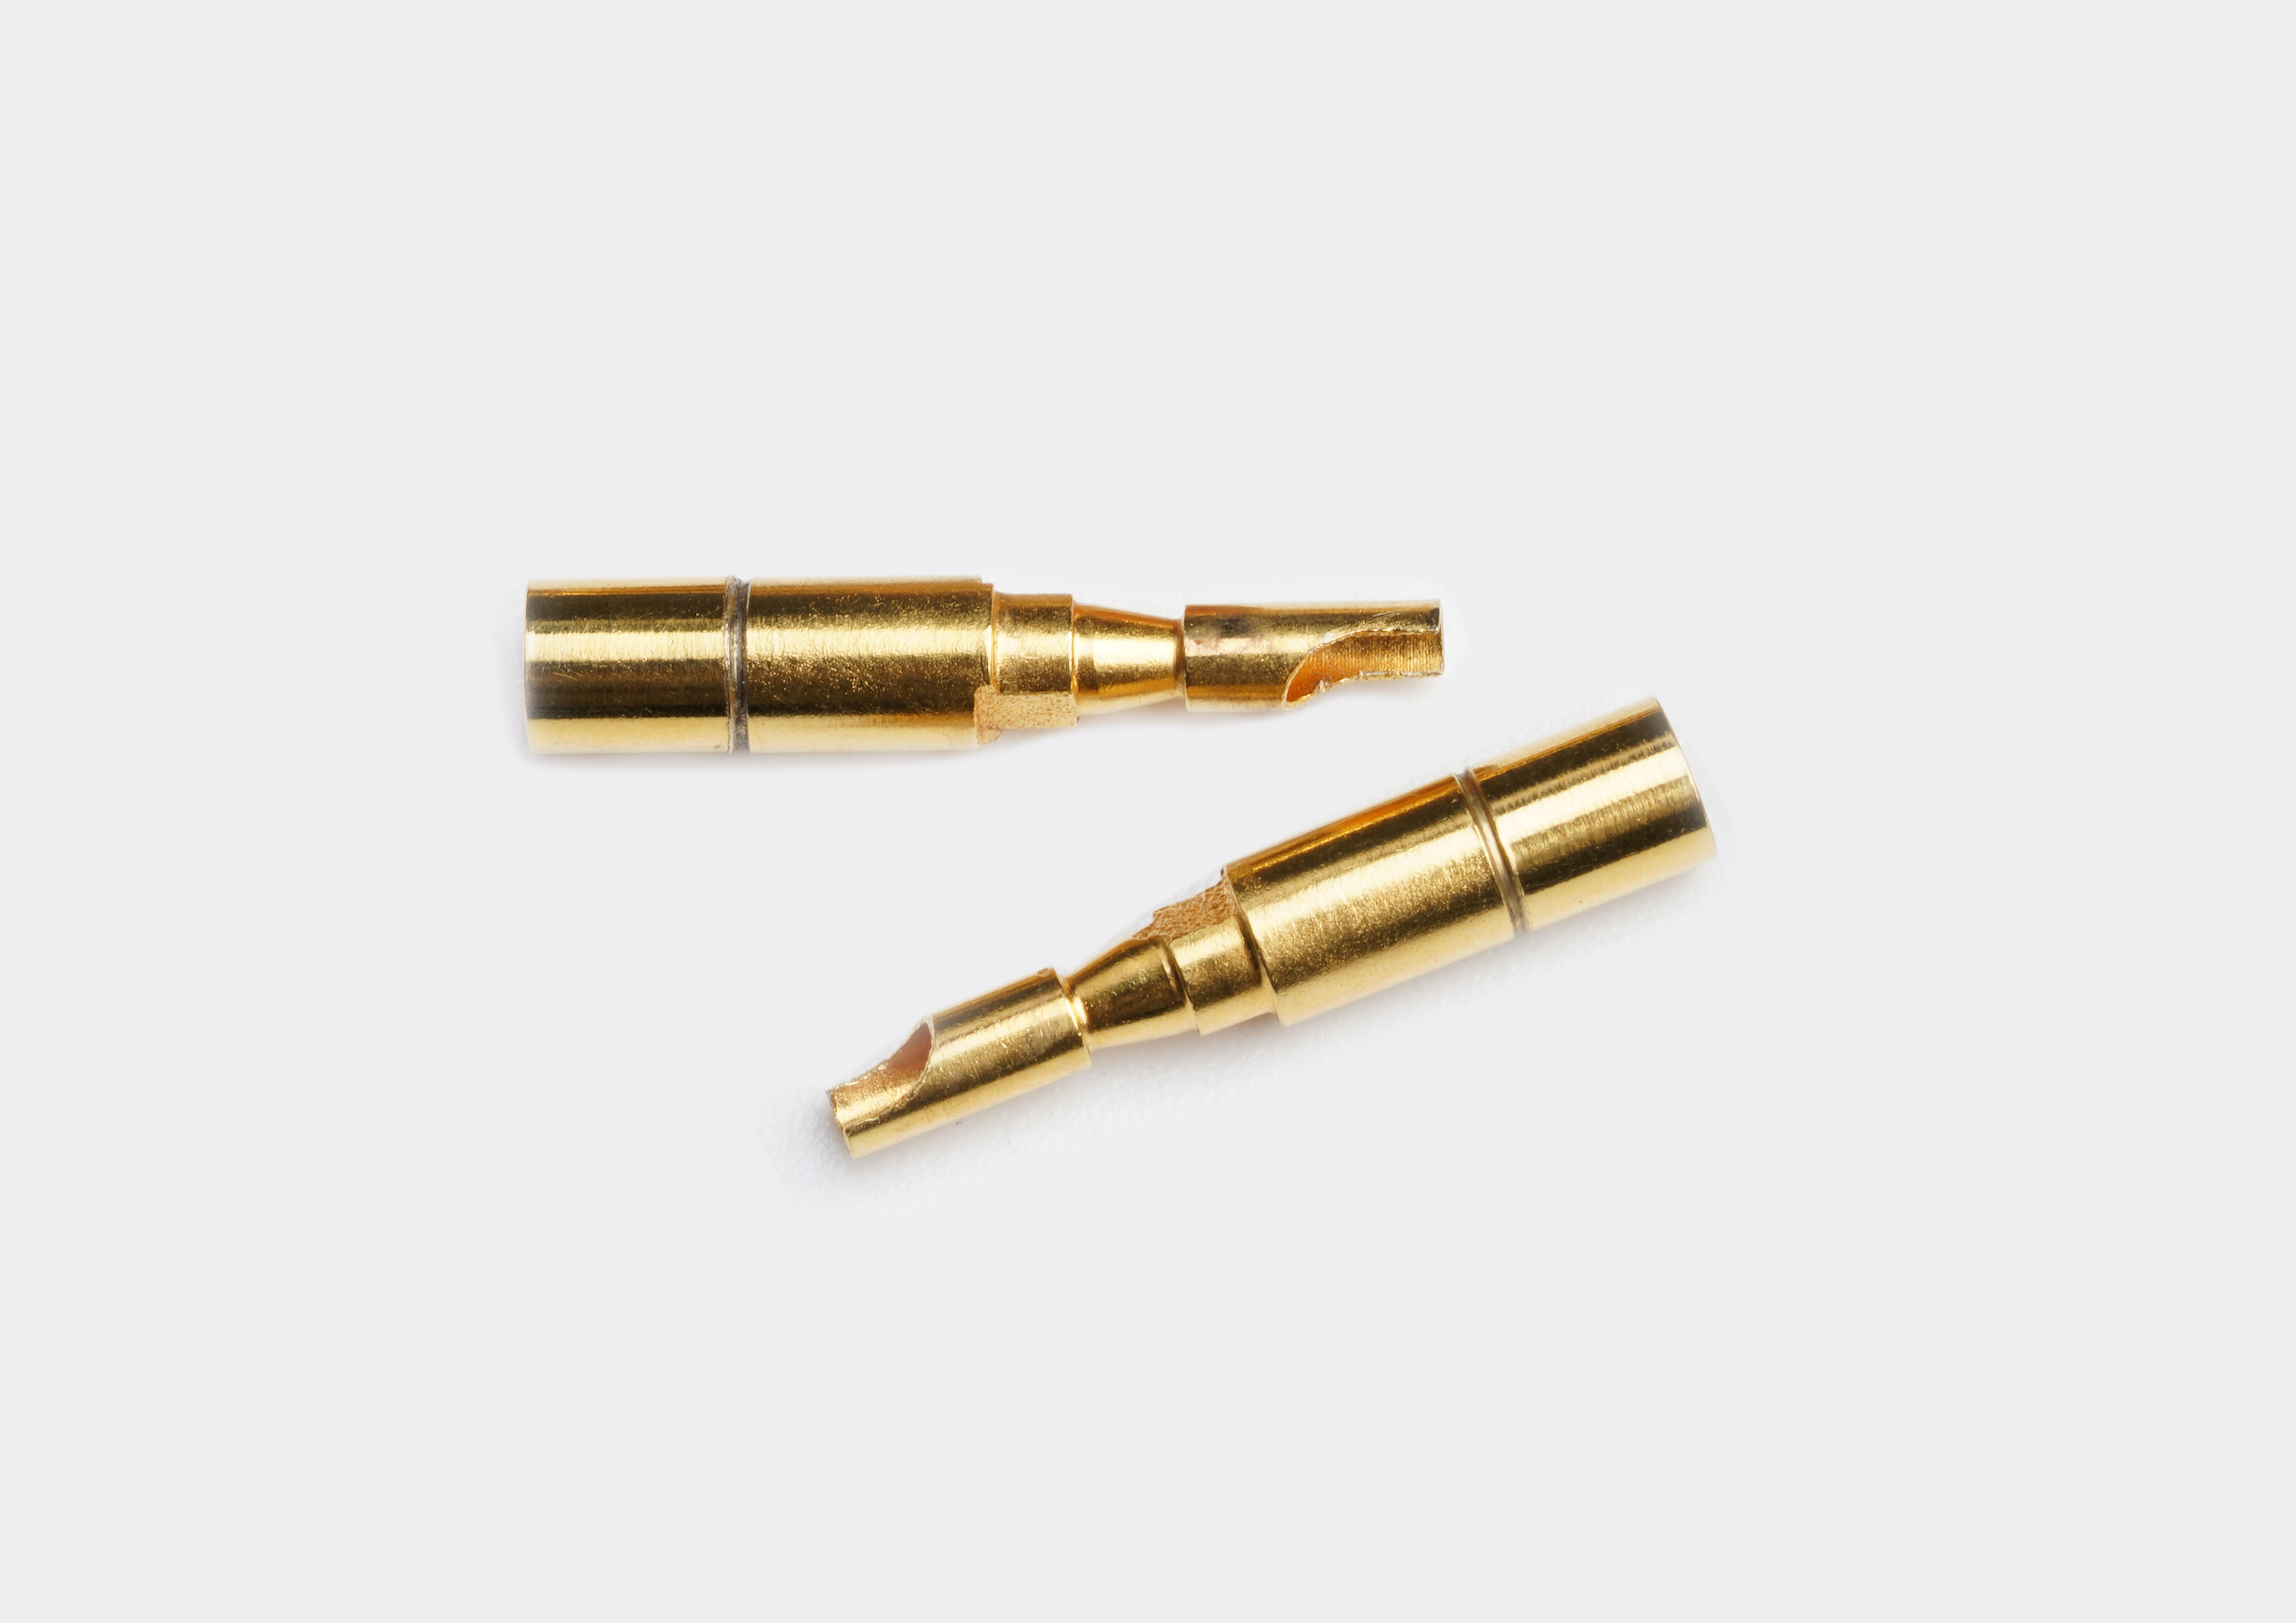 Wire spring hole gold-plated terminal